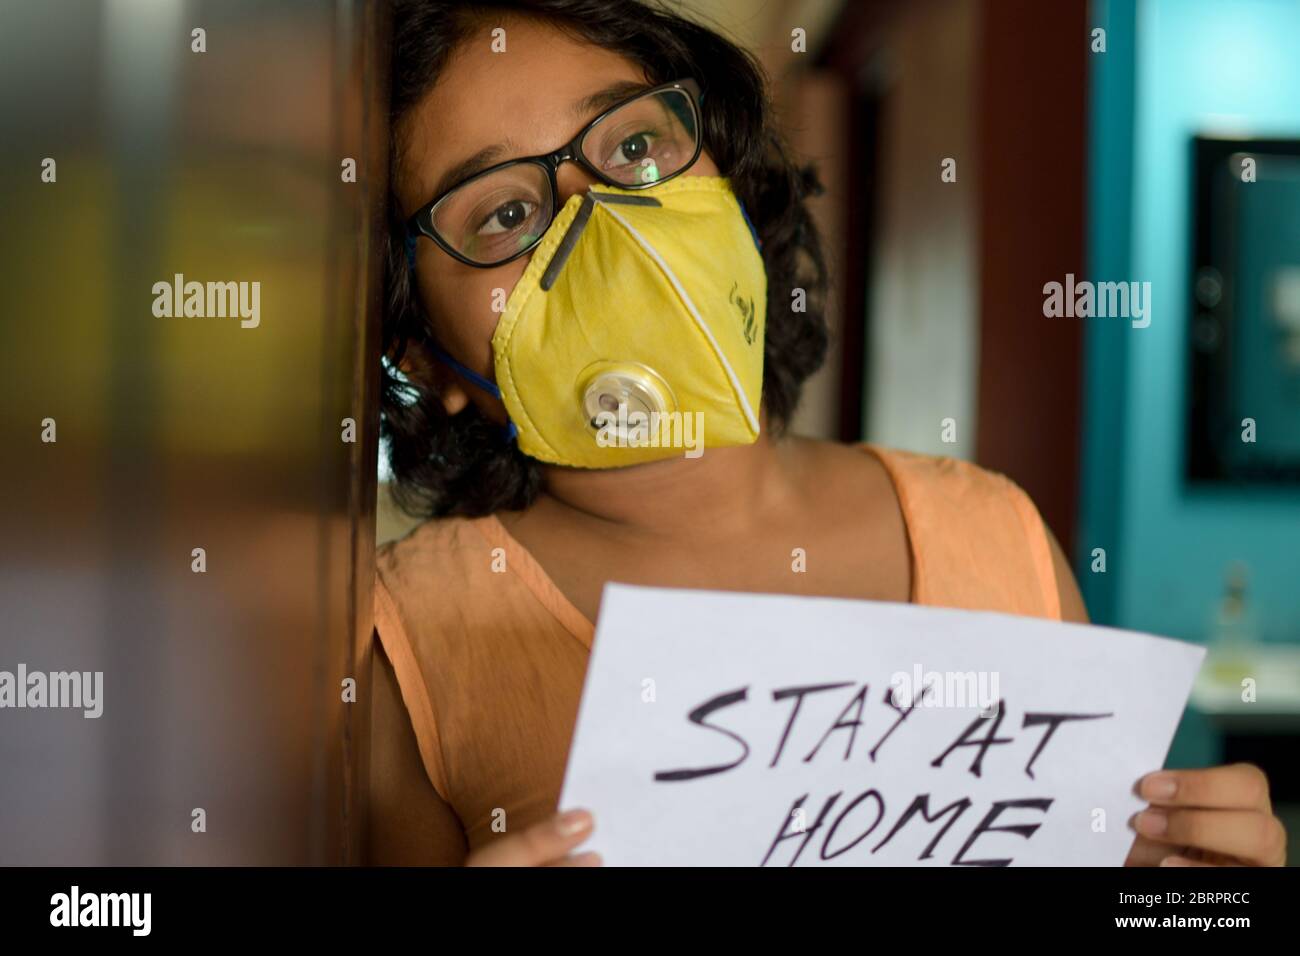 Girl holding quarantine message 'stay at home' to fight COVID-19 pandemic Stock Photo